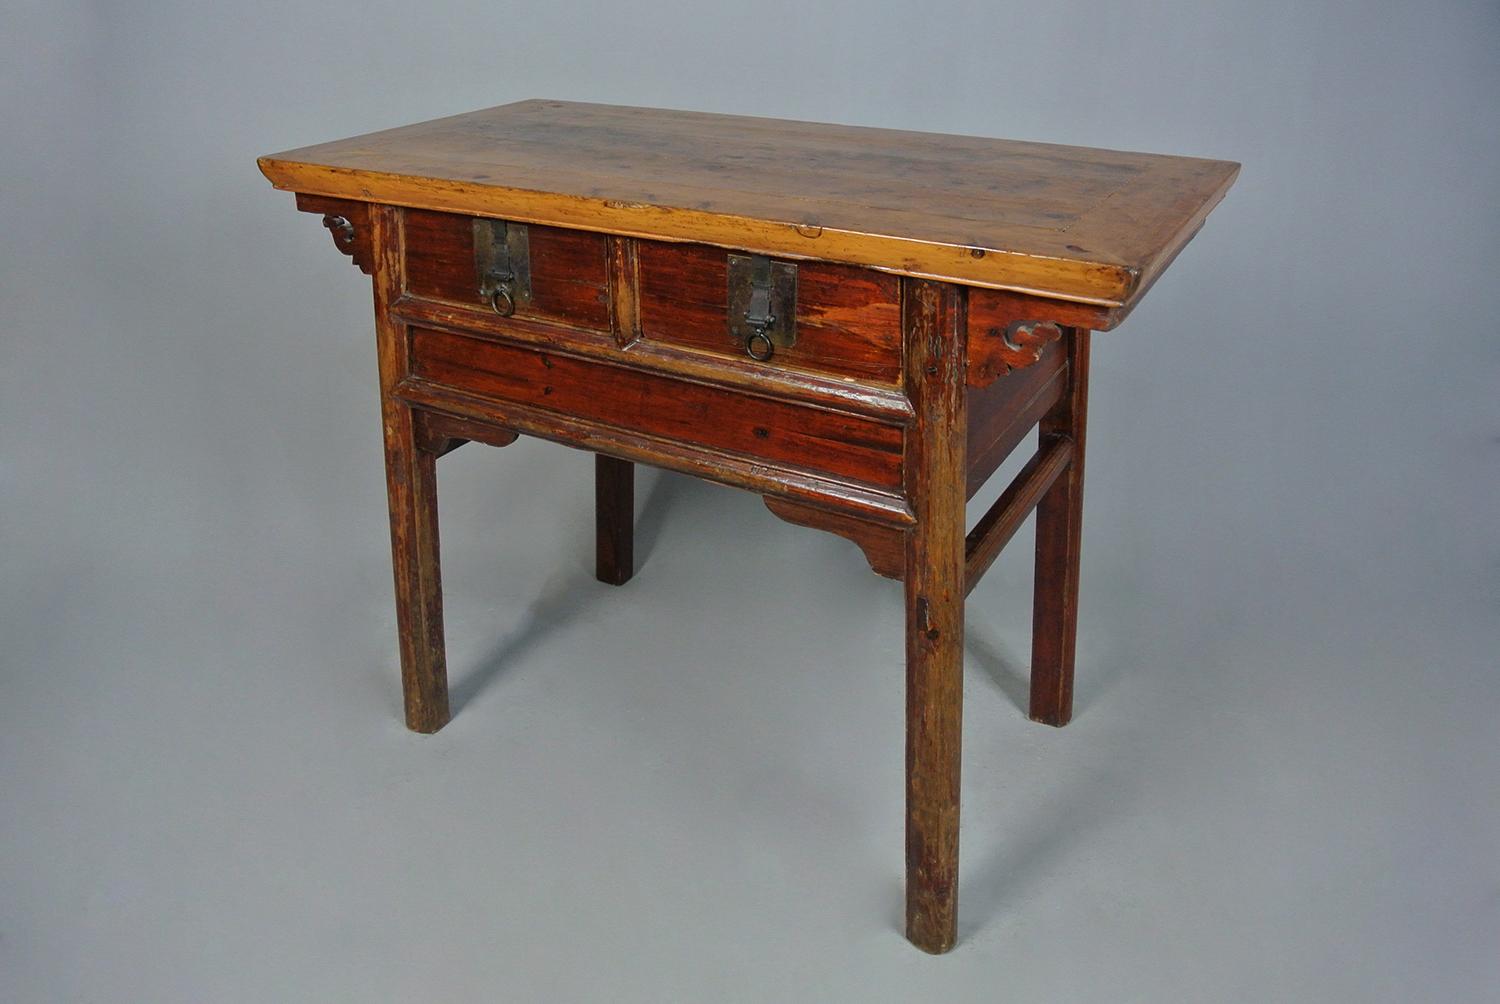 Original Chinese Elm and Bronze Lowboy Altar Table c. 1830 For Sale 4